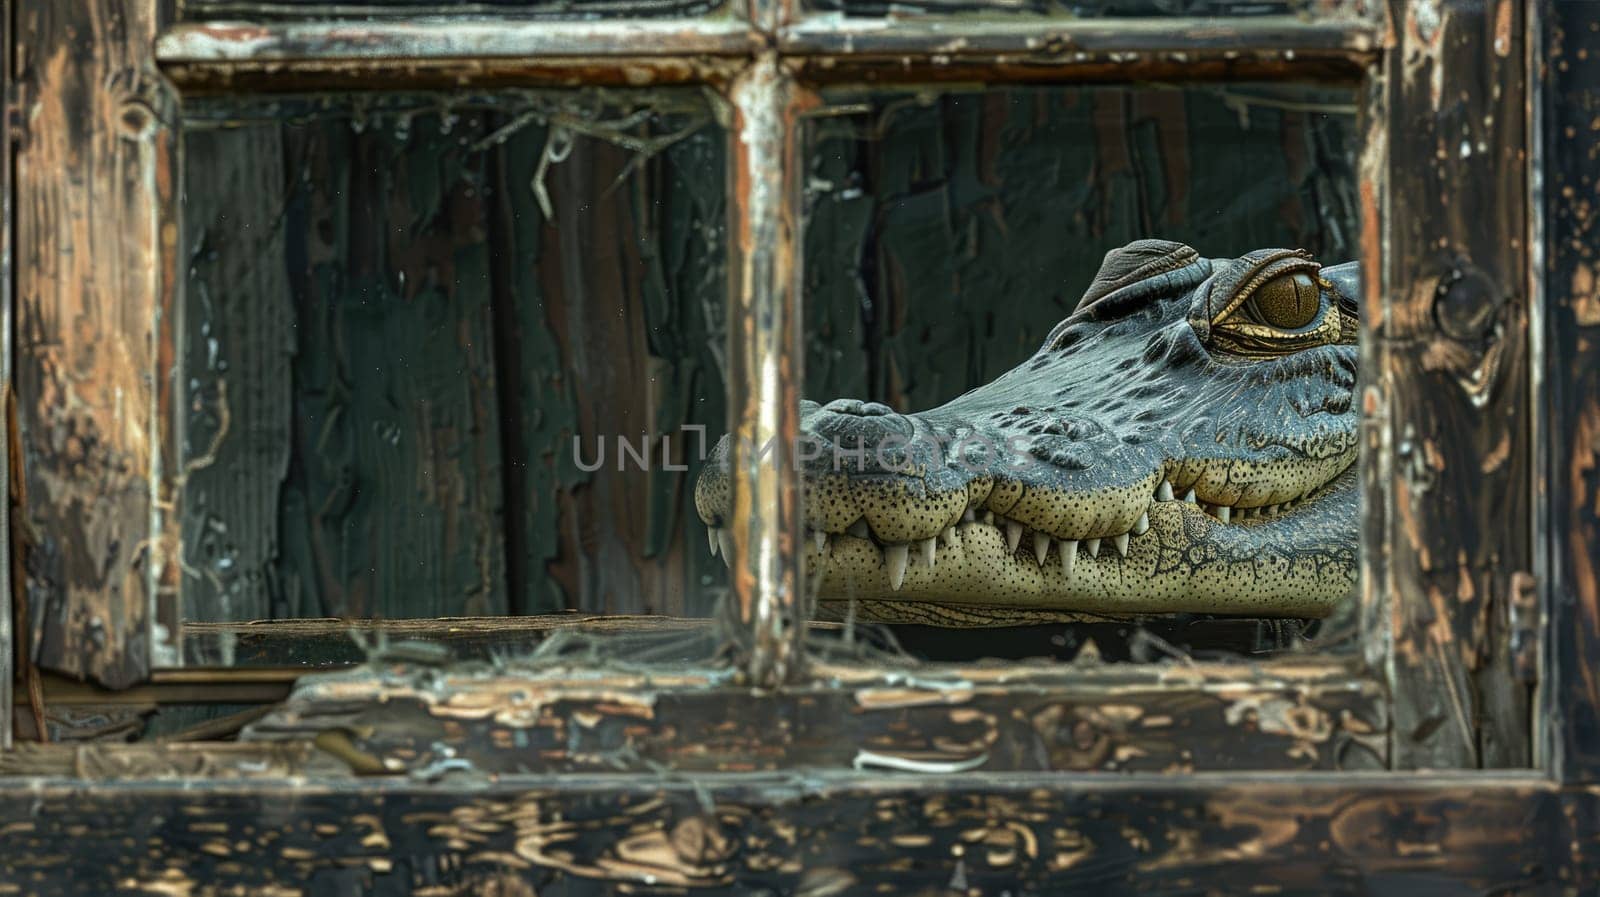 A crocodile climbed into an old abandoned house by natali_brill